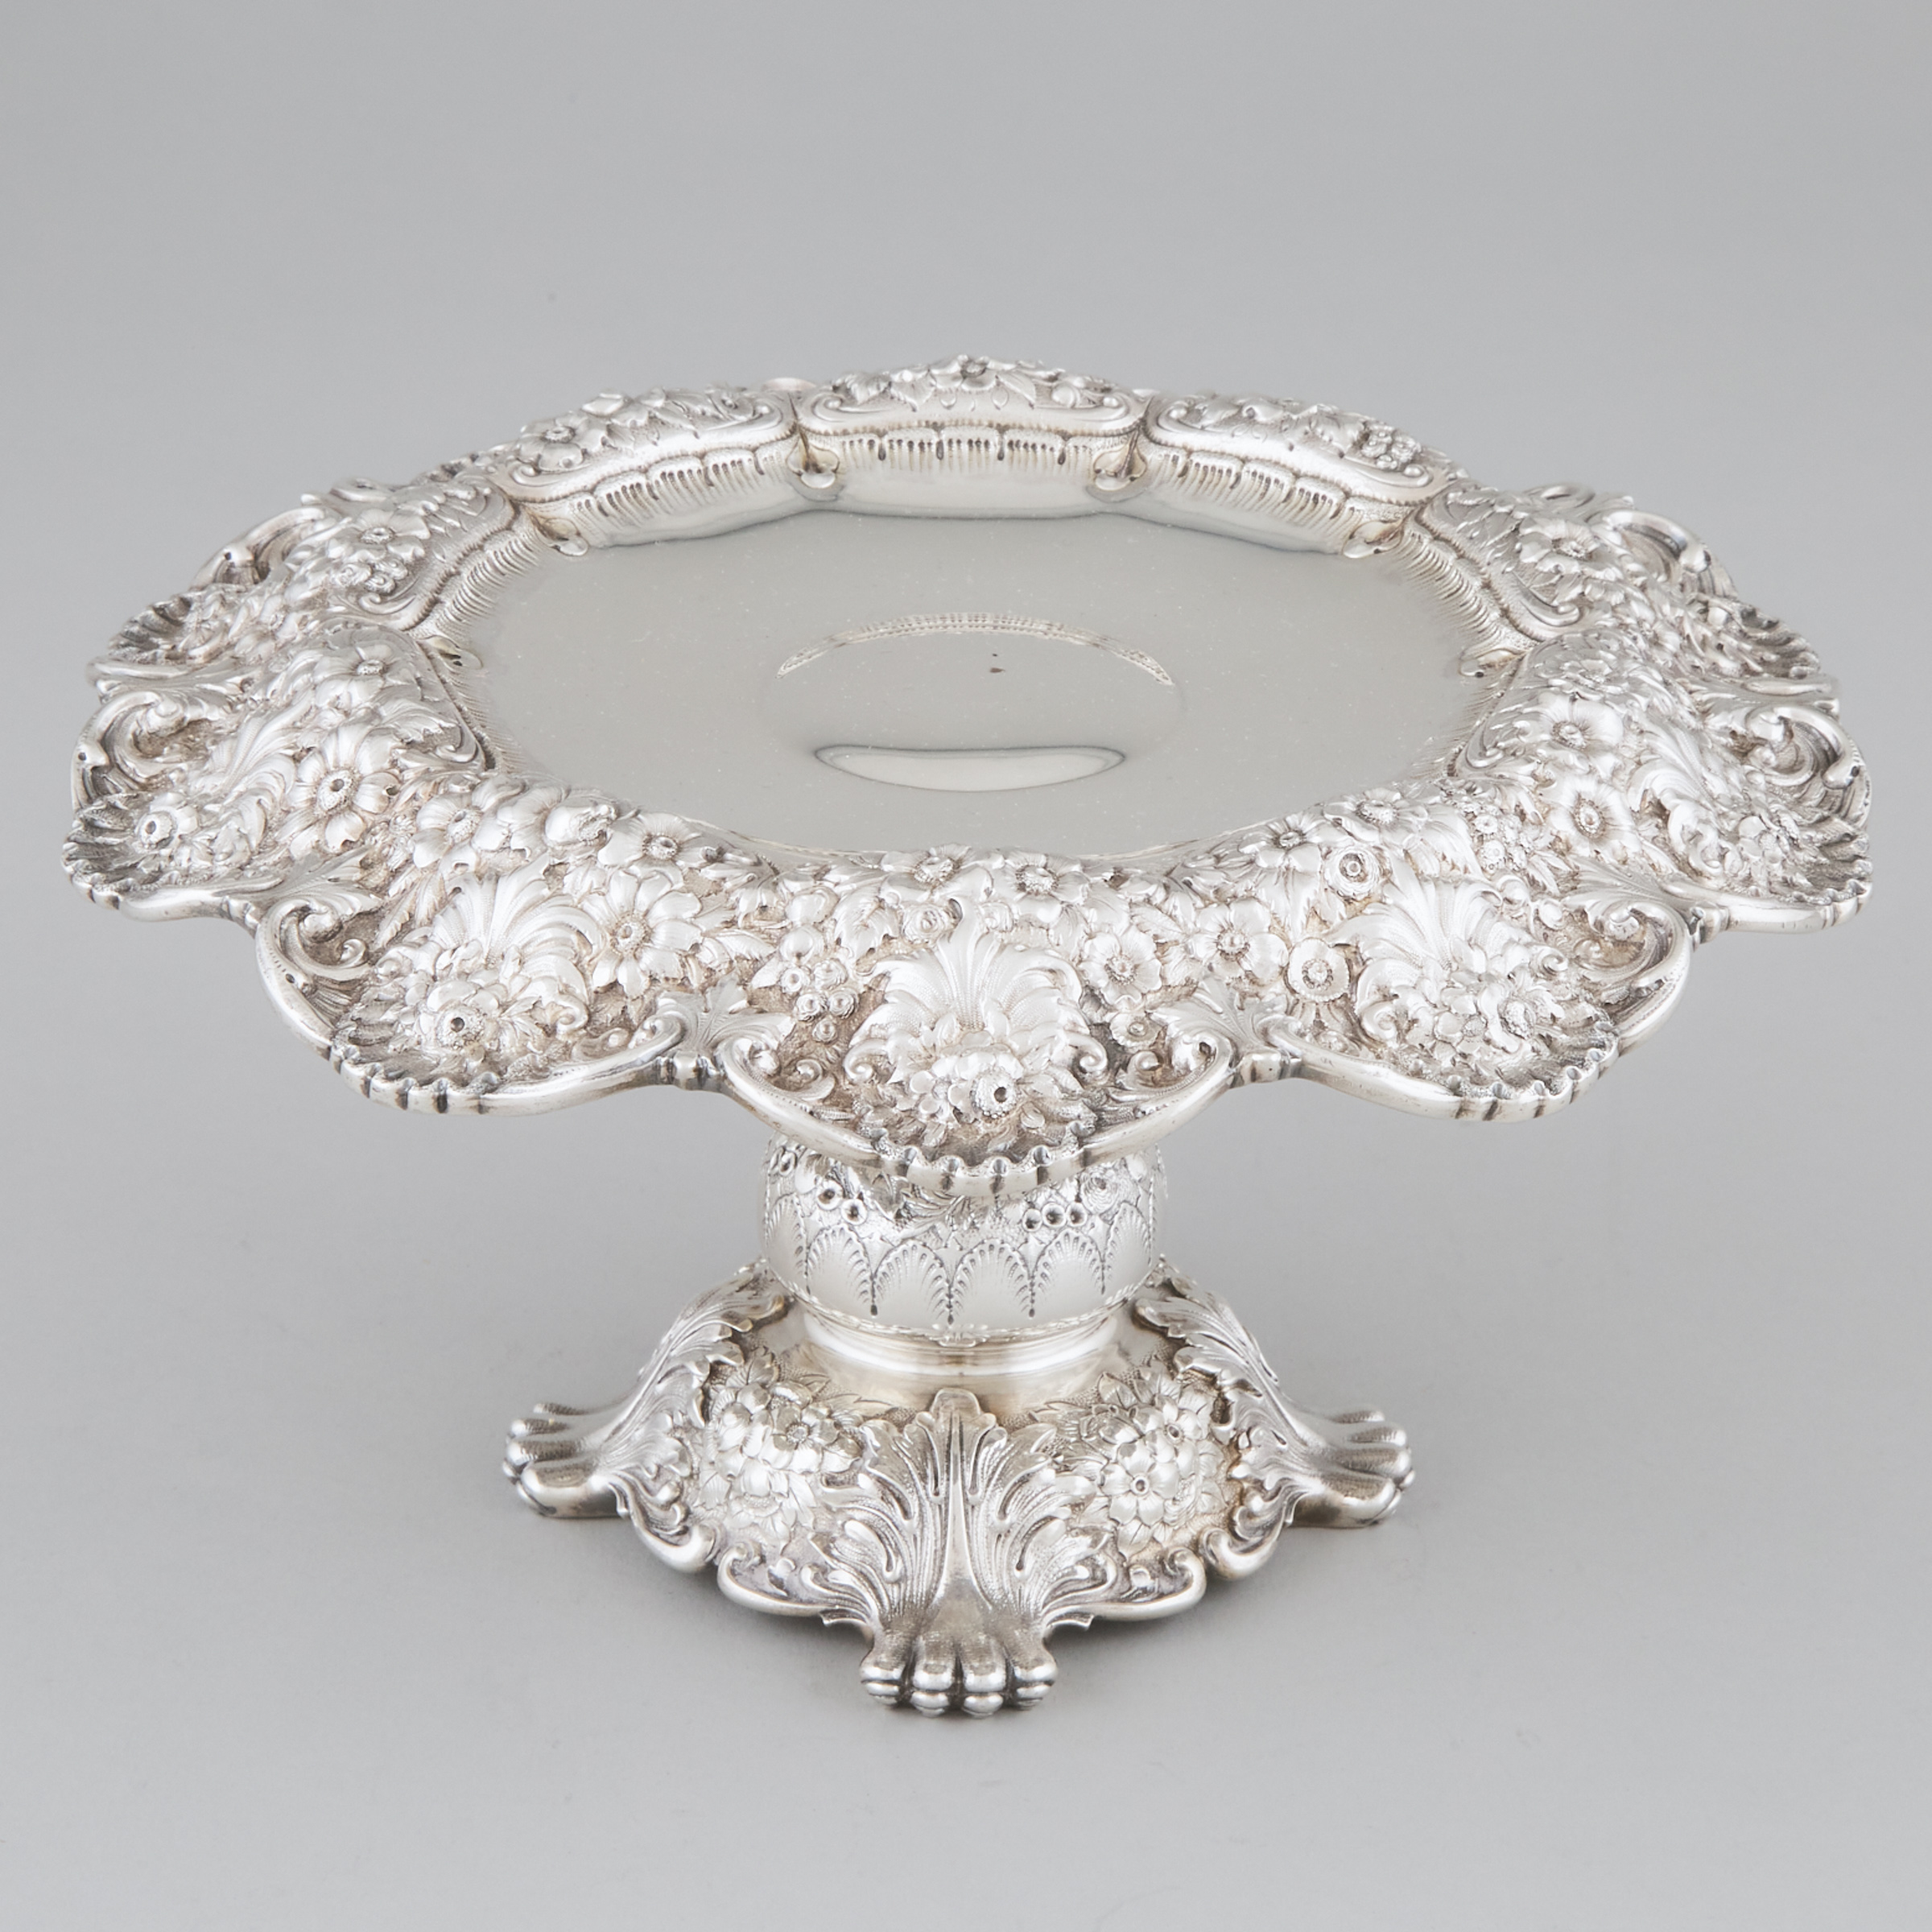 American Silver Repoussé Pedestal Footed Comport, Tiffany & Co., New York, N.Y., c.1875-91